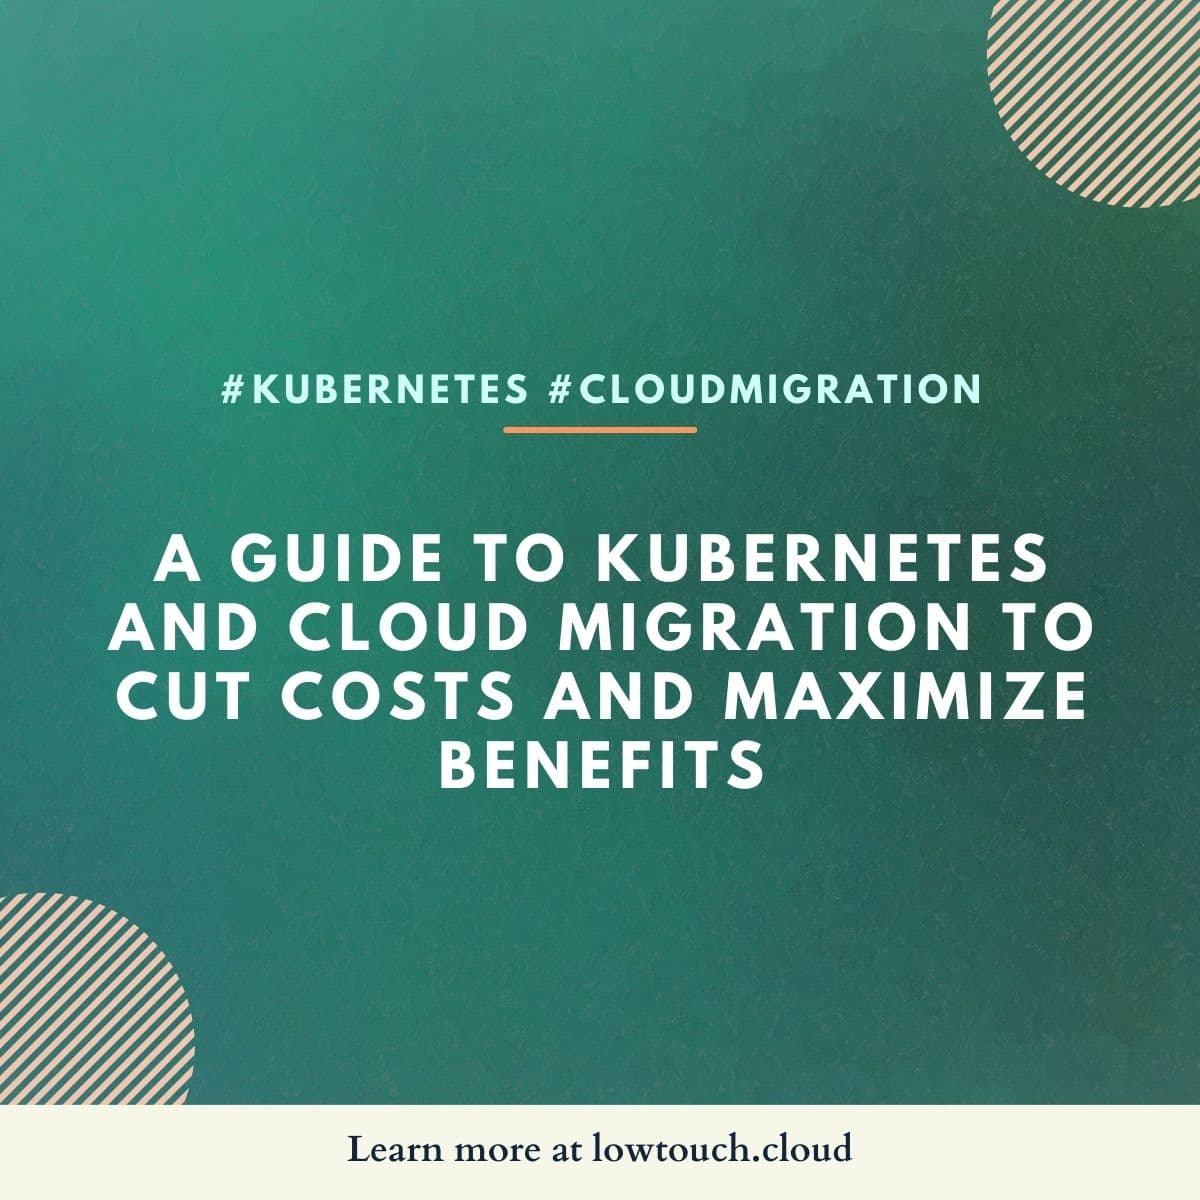 A GUIDE TO KUBERNETES AND CLOUD MIGRATION TO CUT COSTS AND MAXIMIZE BENEFITS